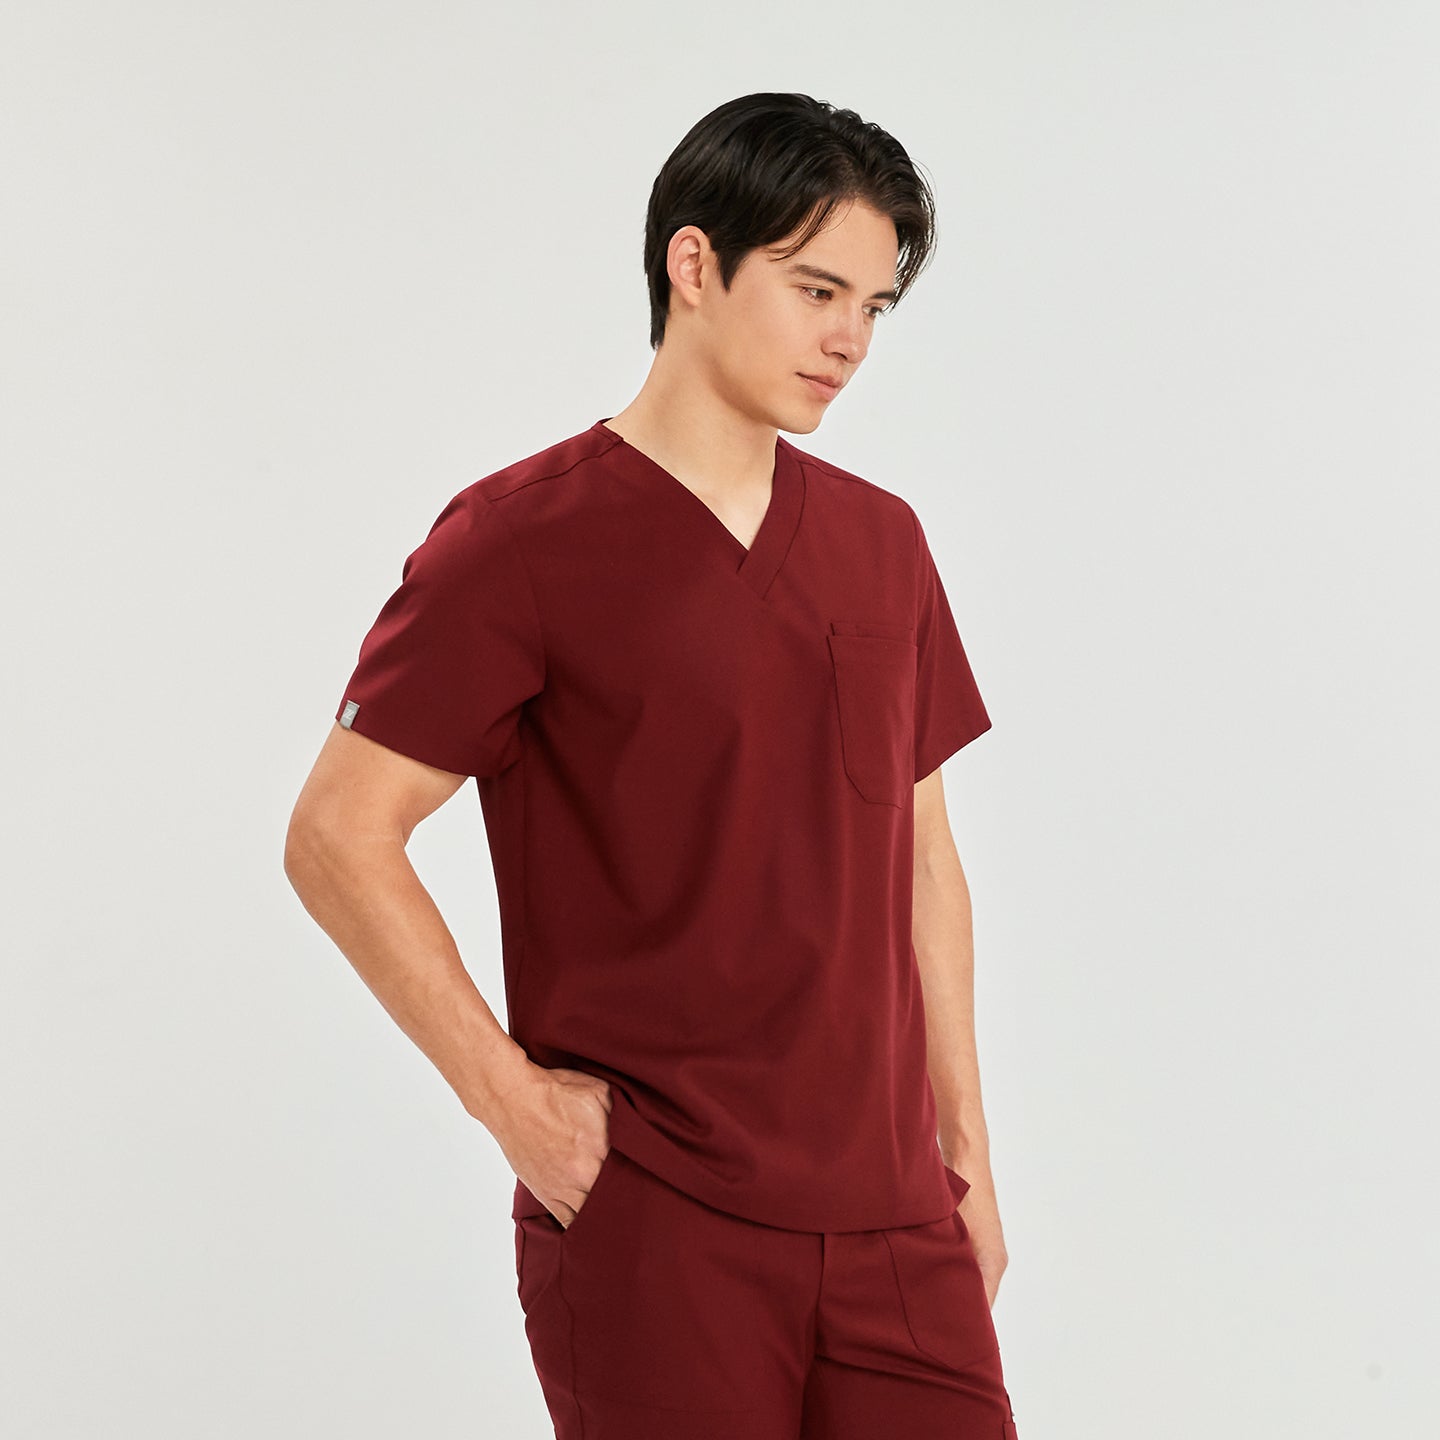  A man wearing a V-neck scrub top with a front chest pocket, standing with his hands in his pockets,Burgundy